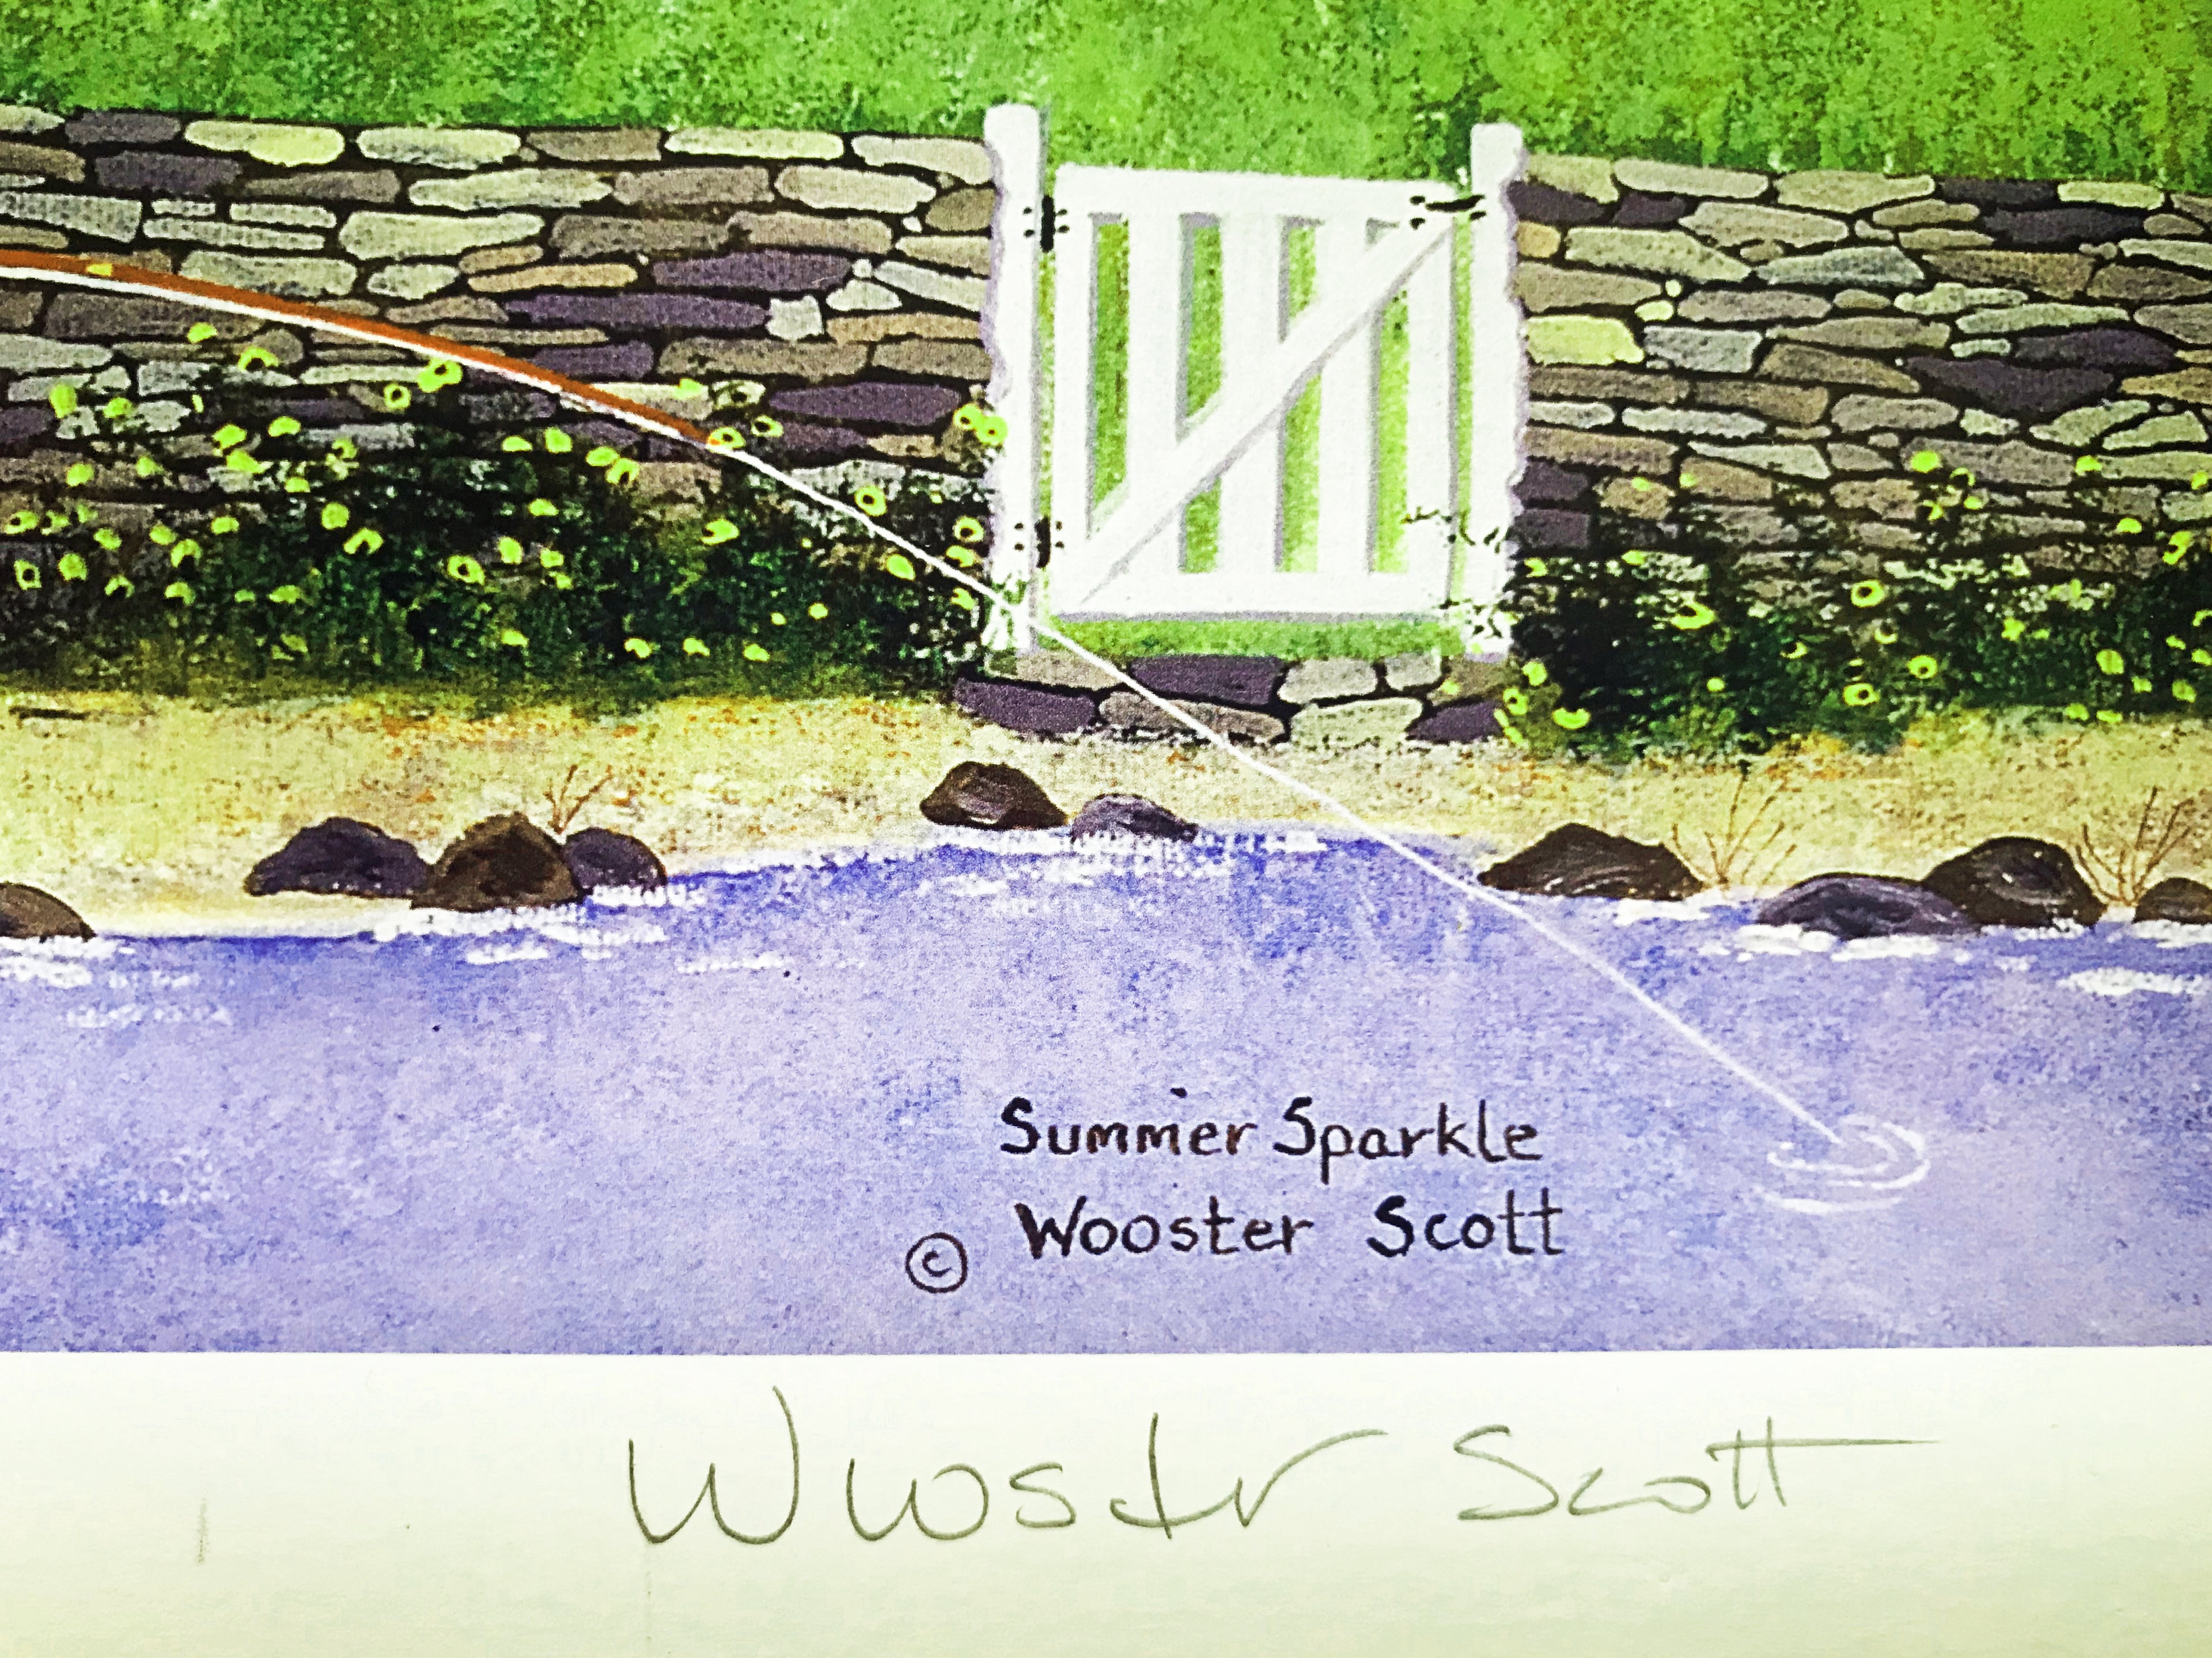 Summer Sparkle Jane Wooster Scott Lithograph Print Artist Hand Signed and Numbered